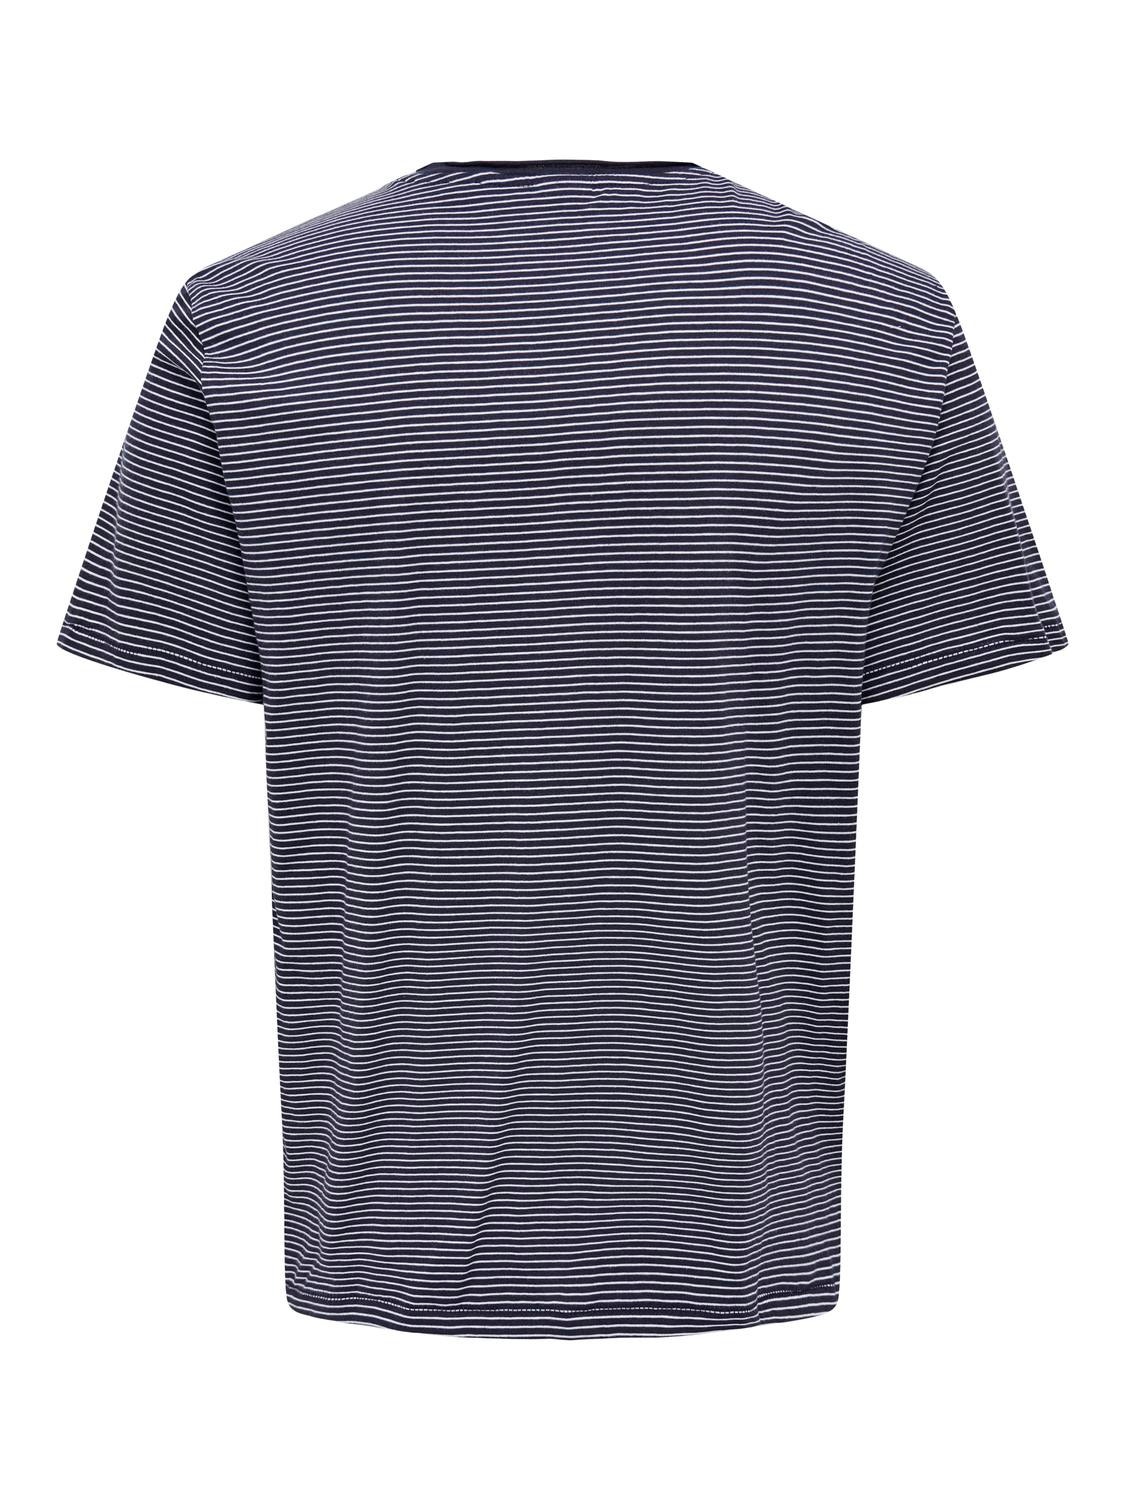 ONLY & SONS Striped o-neck with chest pocket -Dark Navy - 22025680